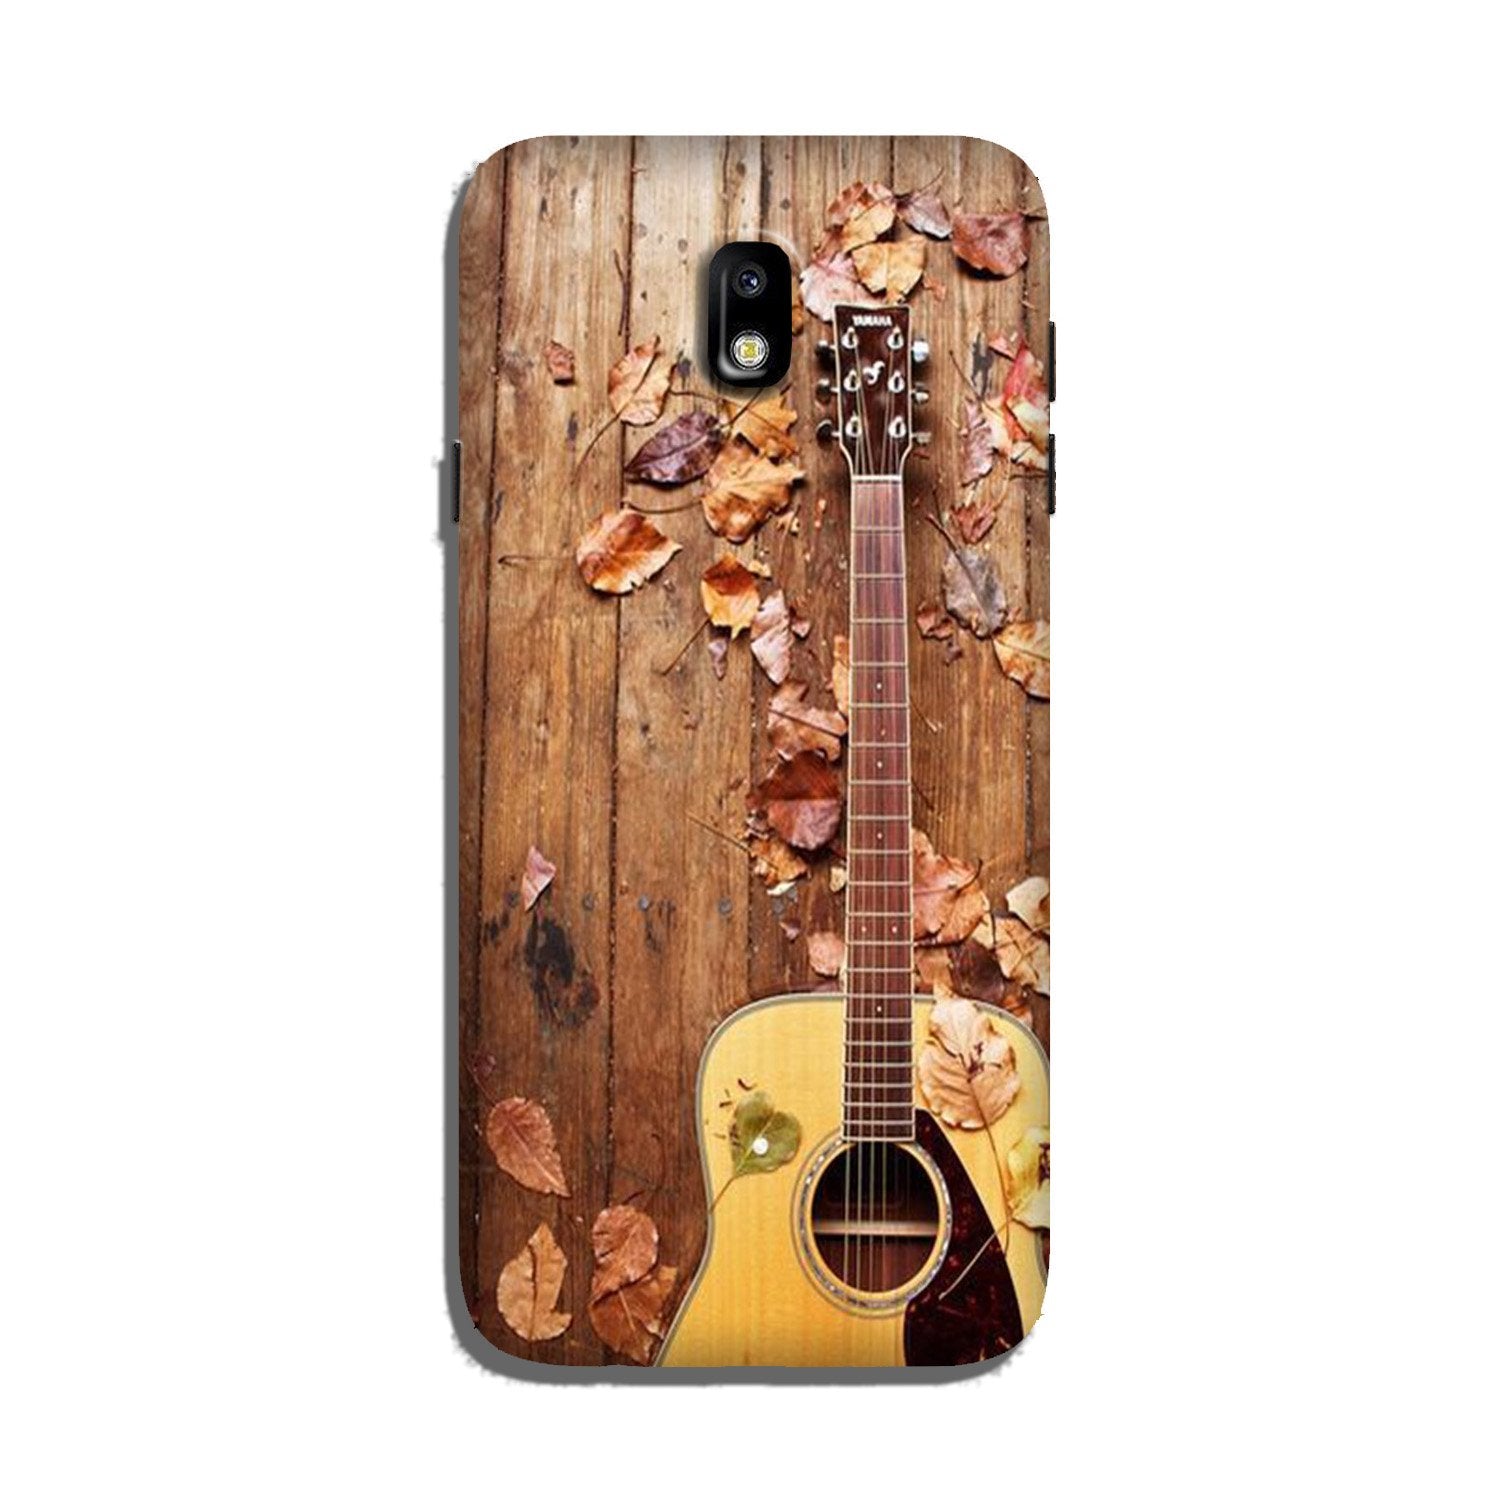 Guitar Case for Galaxy J5 Pro